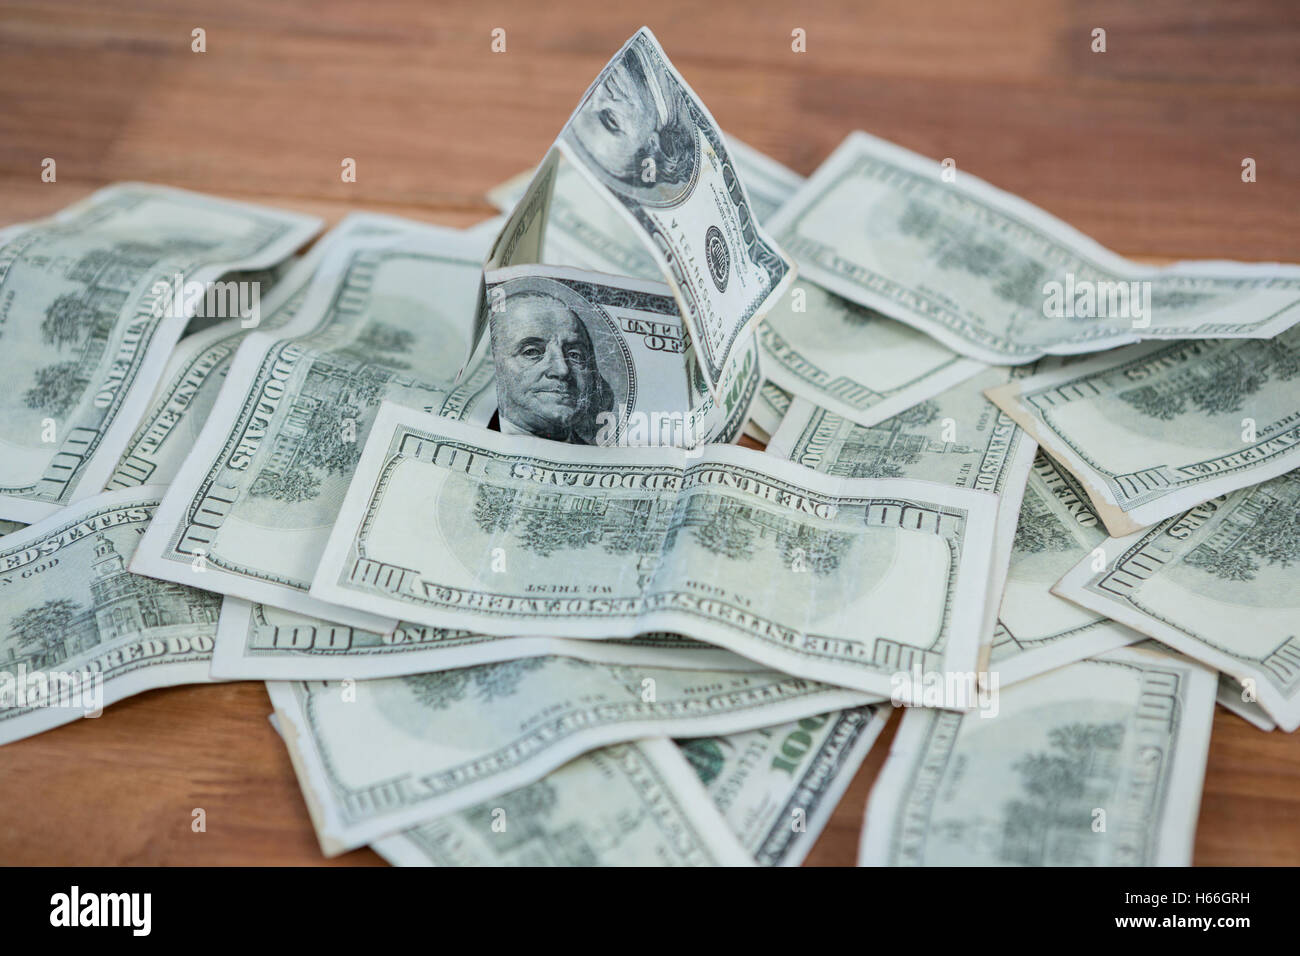 Lots of dollar bank notes scattered on the table Stock Photo